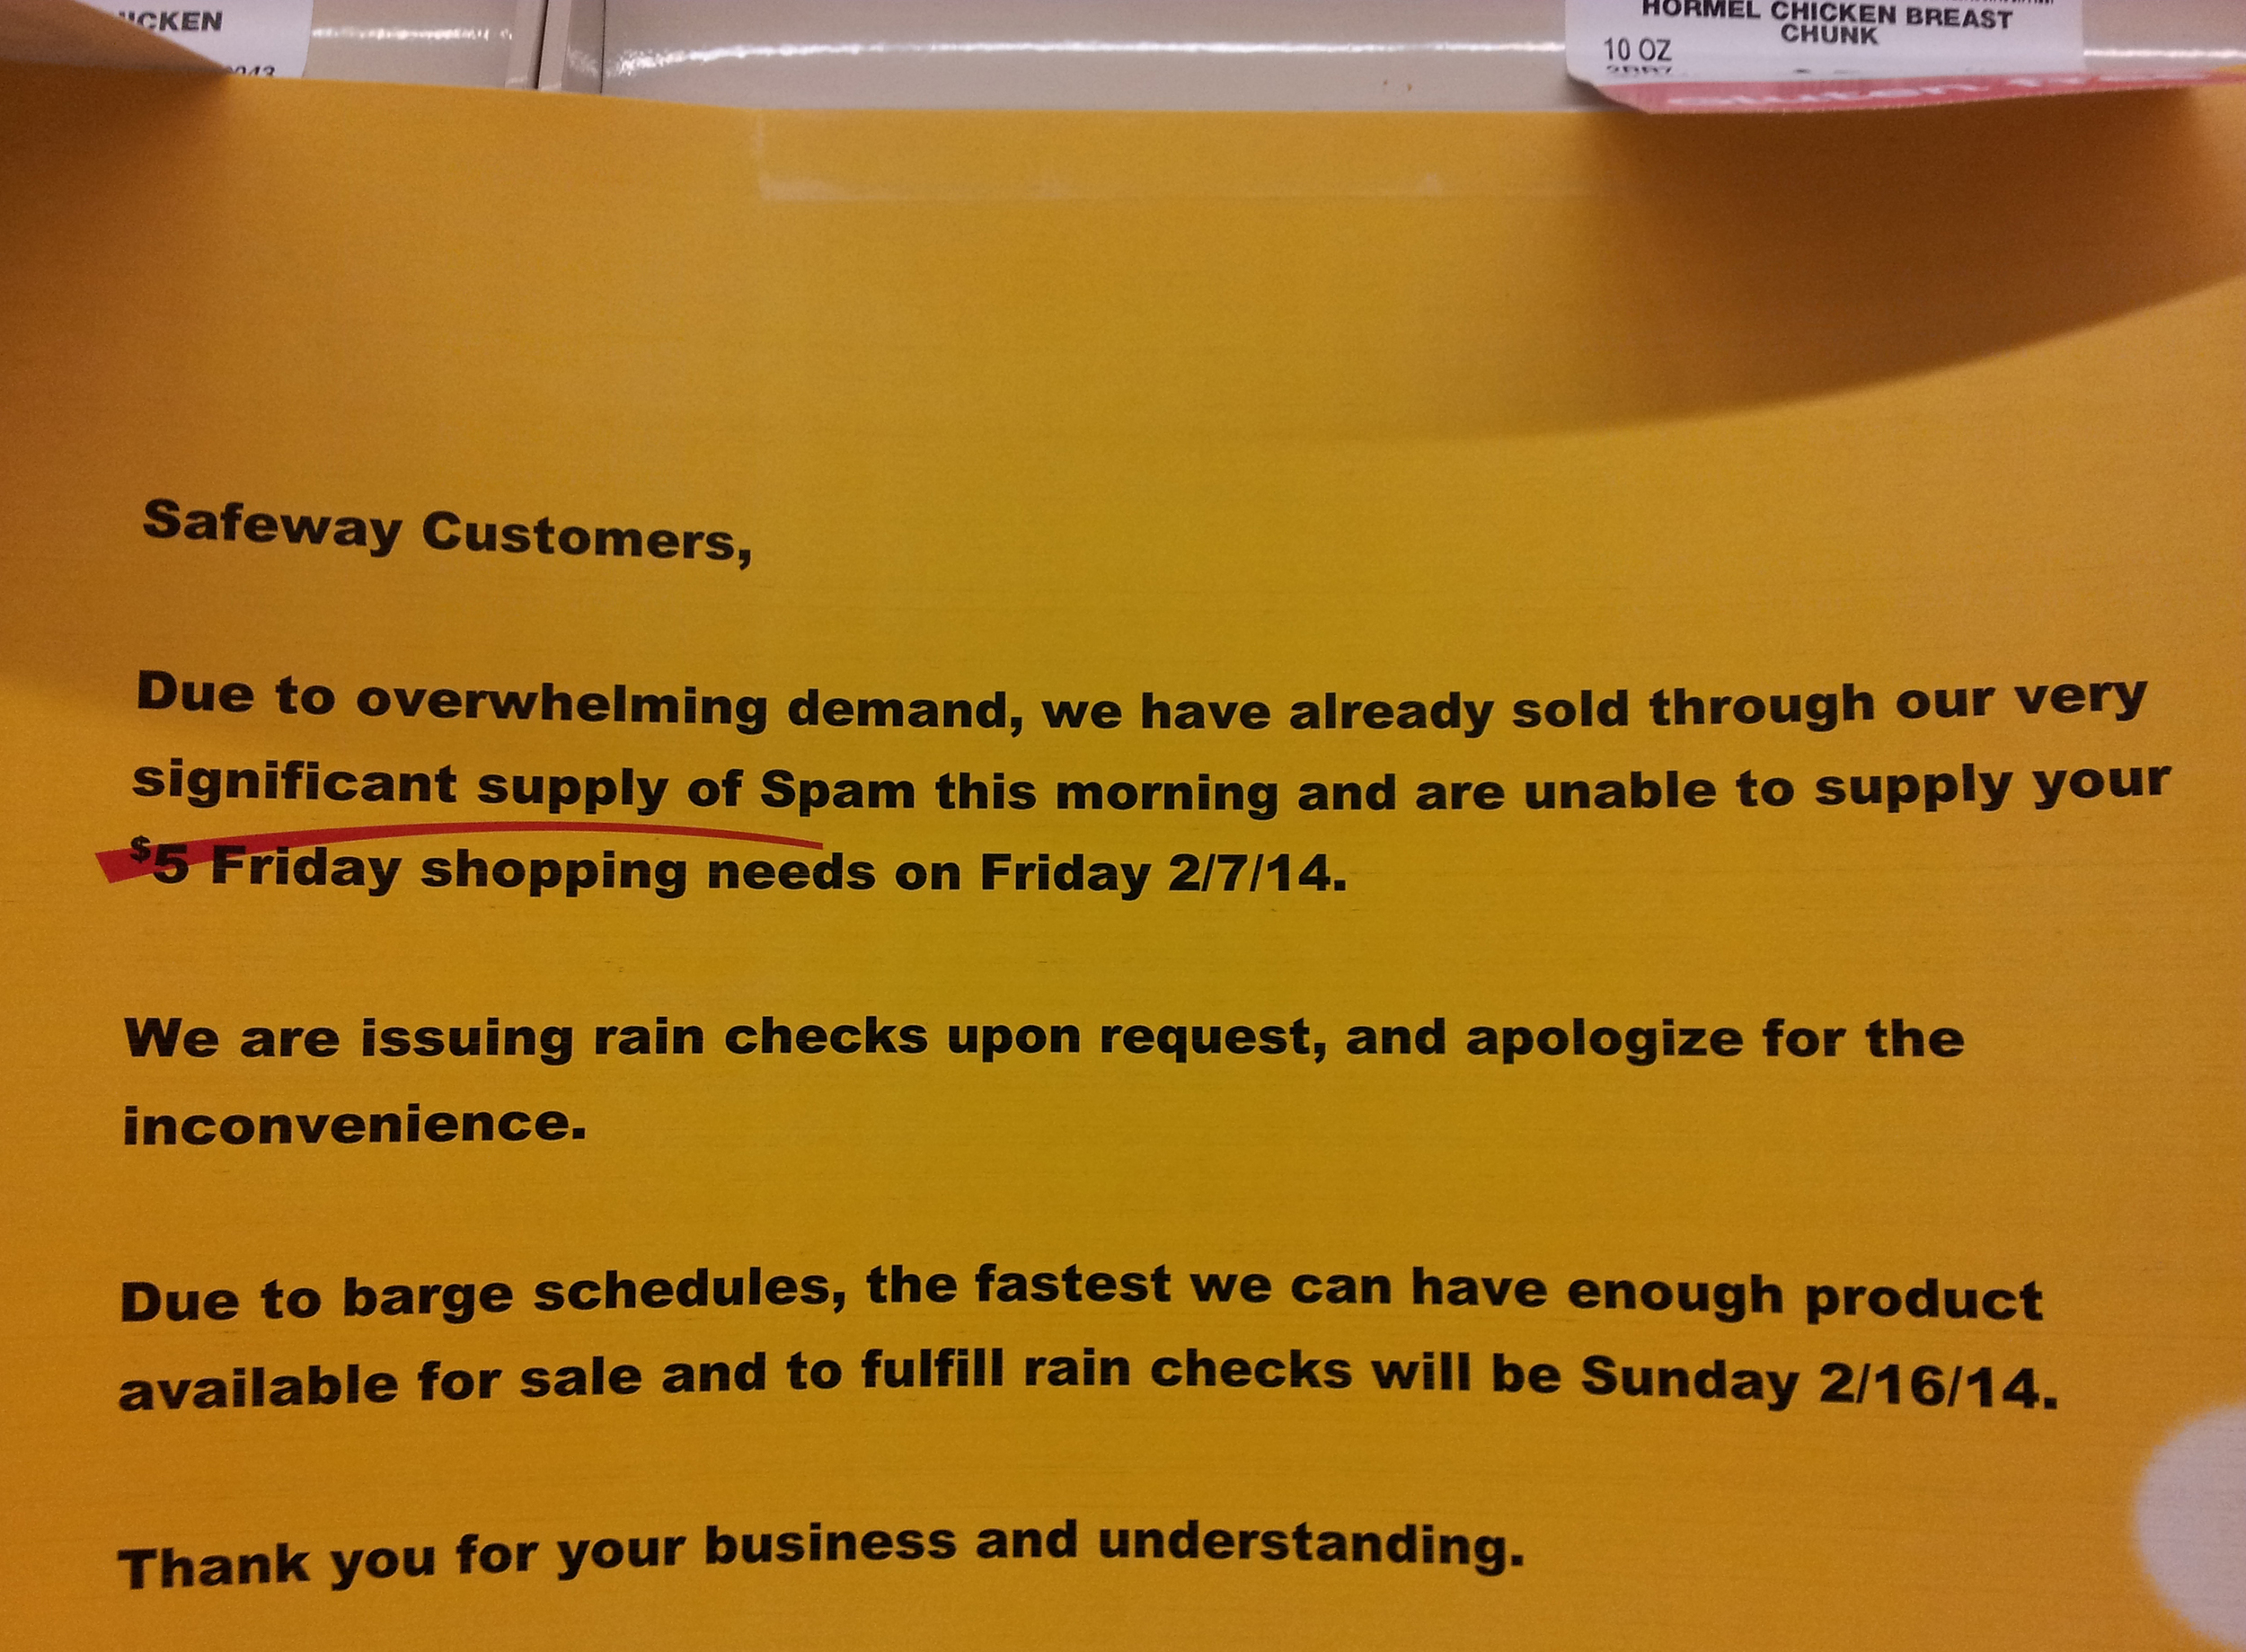  Ketchikanians suffered through a SPAM shortage at Safeway in 2014. 